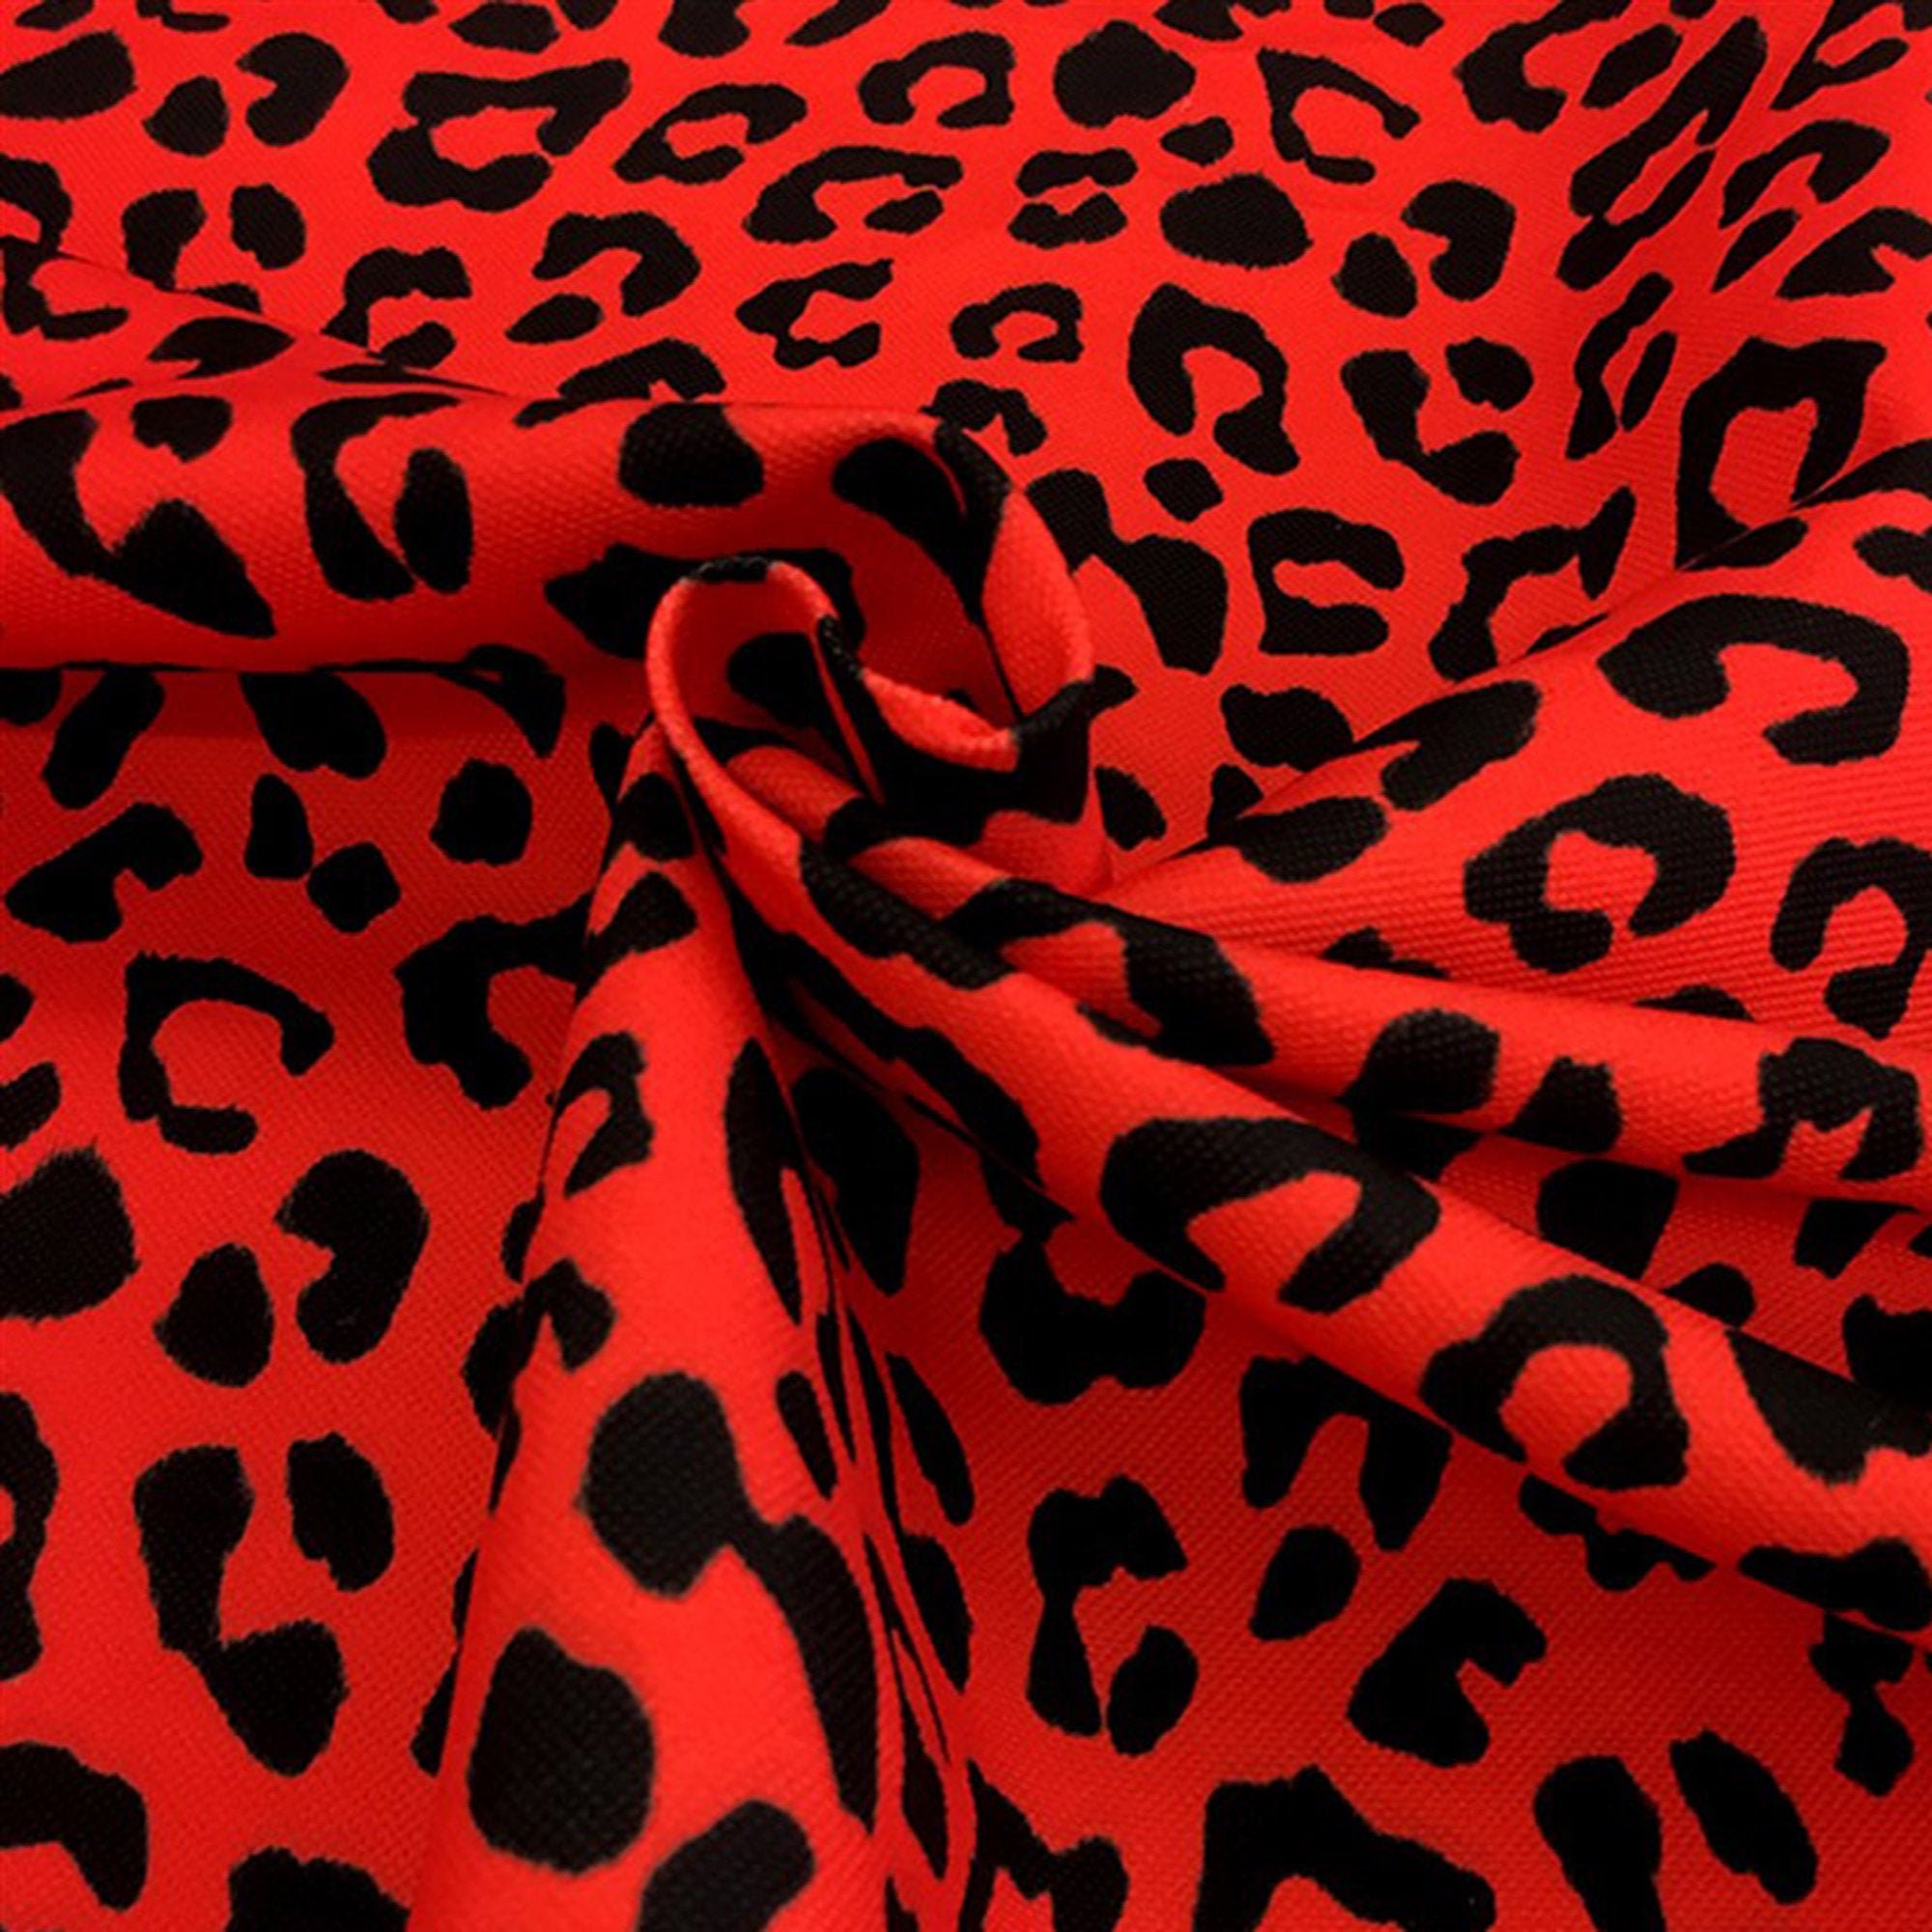 Red Leopard Fabric by the Yard Black & Red Cheetah Animal - Etsy